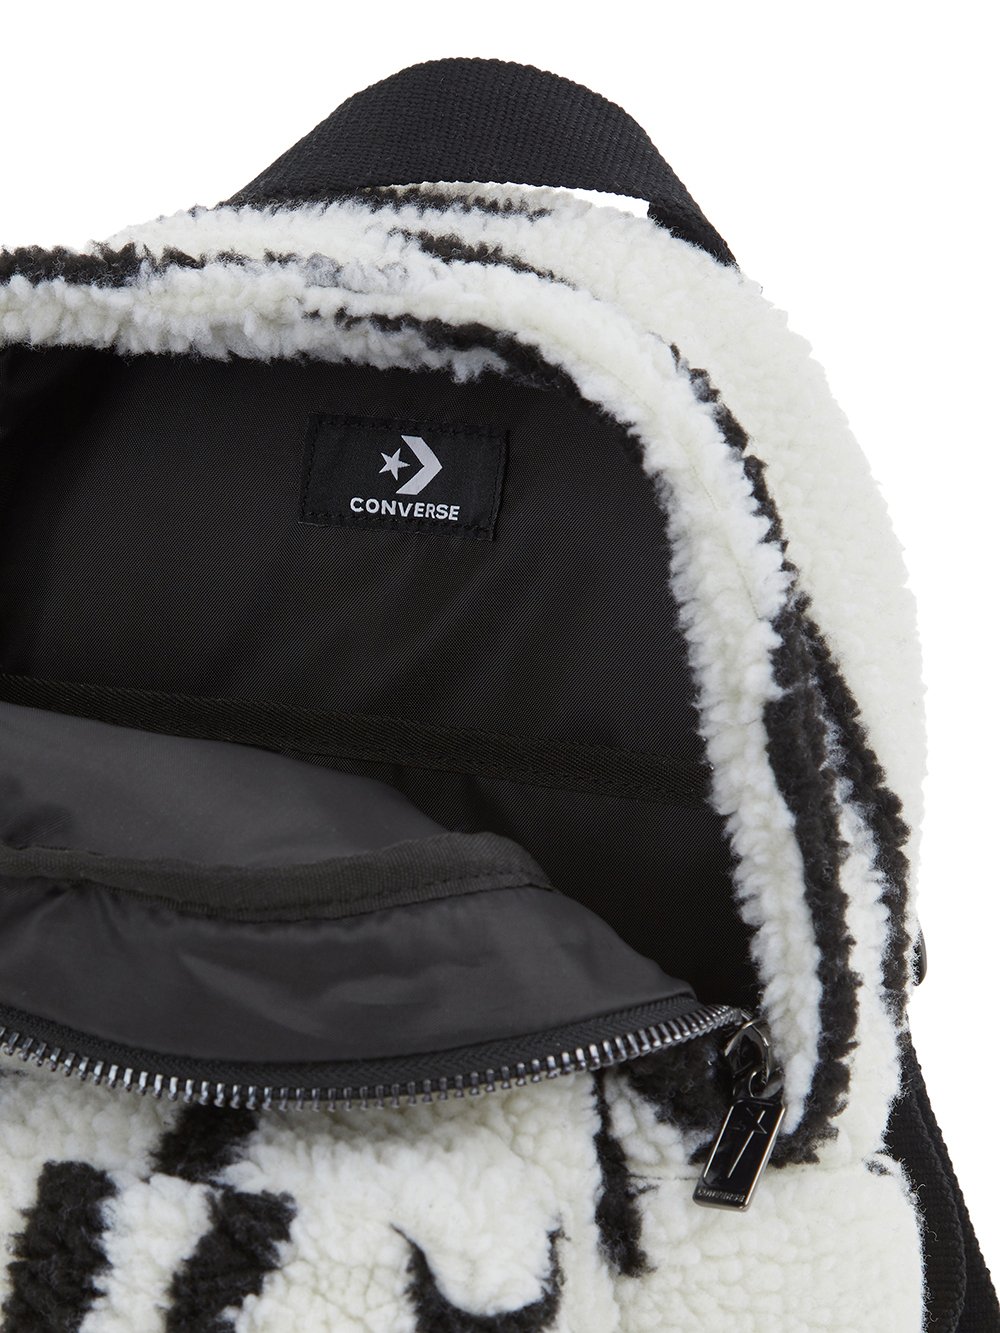 CONVERSE X DRKSHDW GO LO BACKPACK